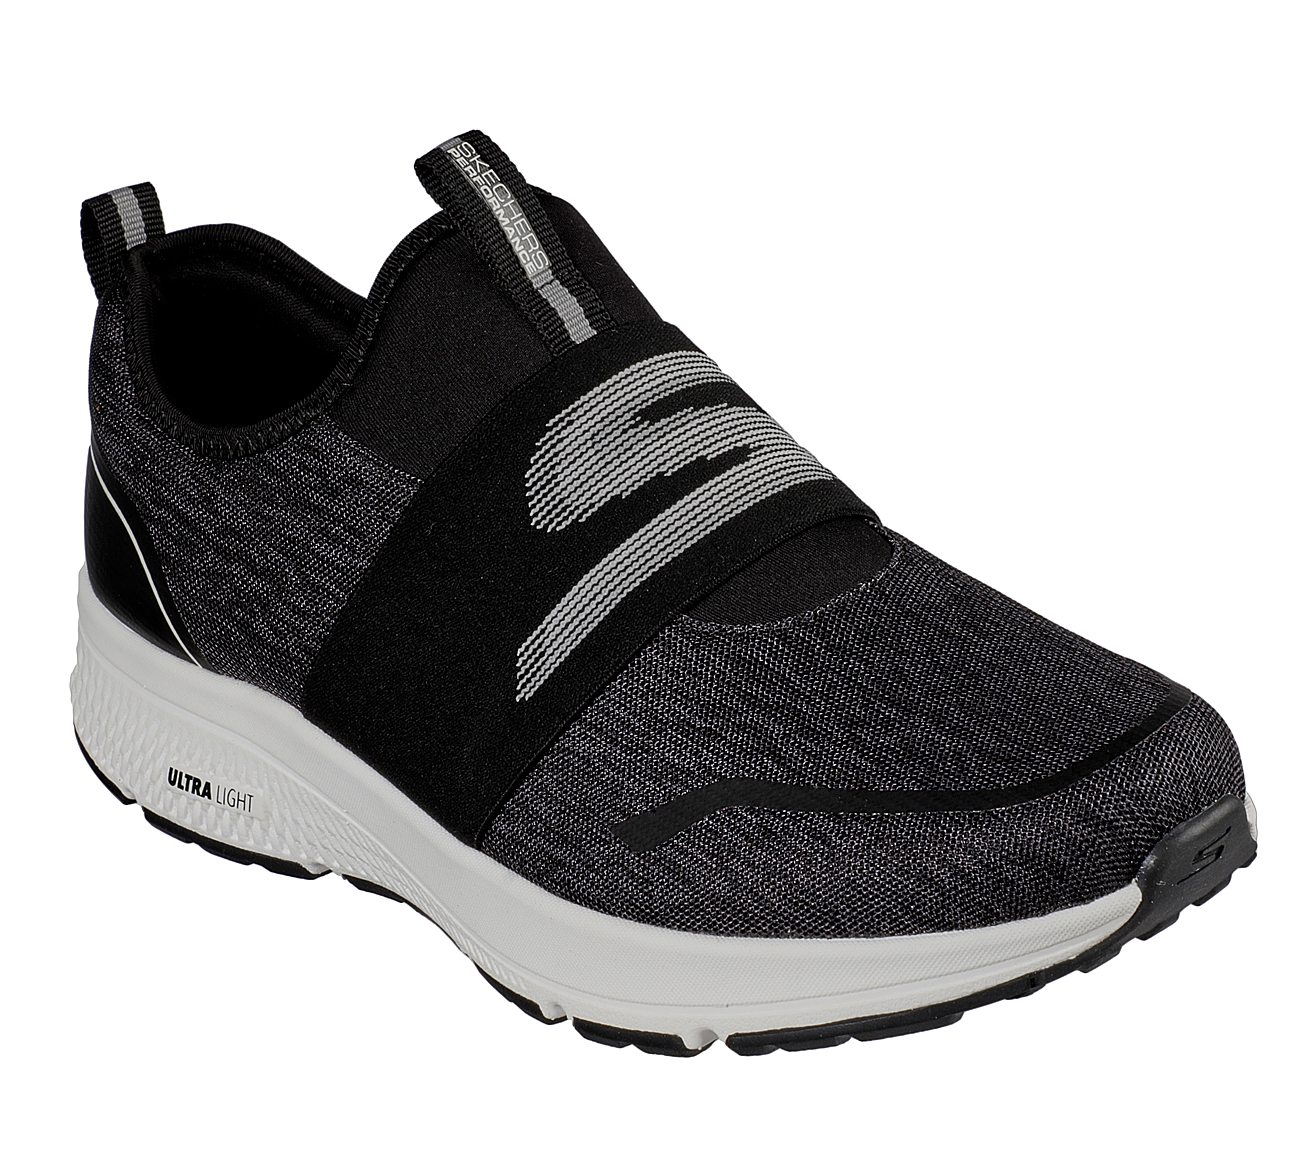 GO RUN CONSISTENT - AMBITION, BLACK/WHITE Footwear Top View